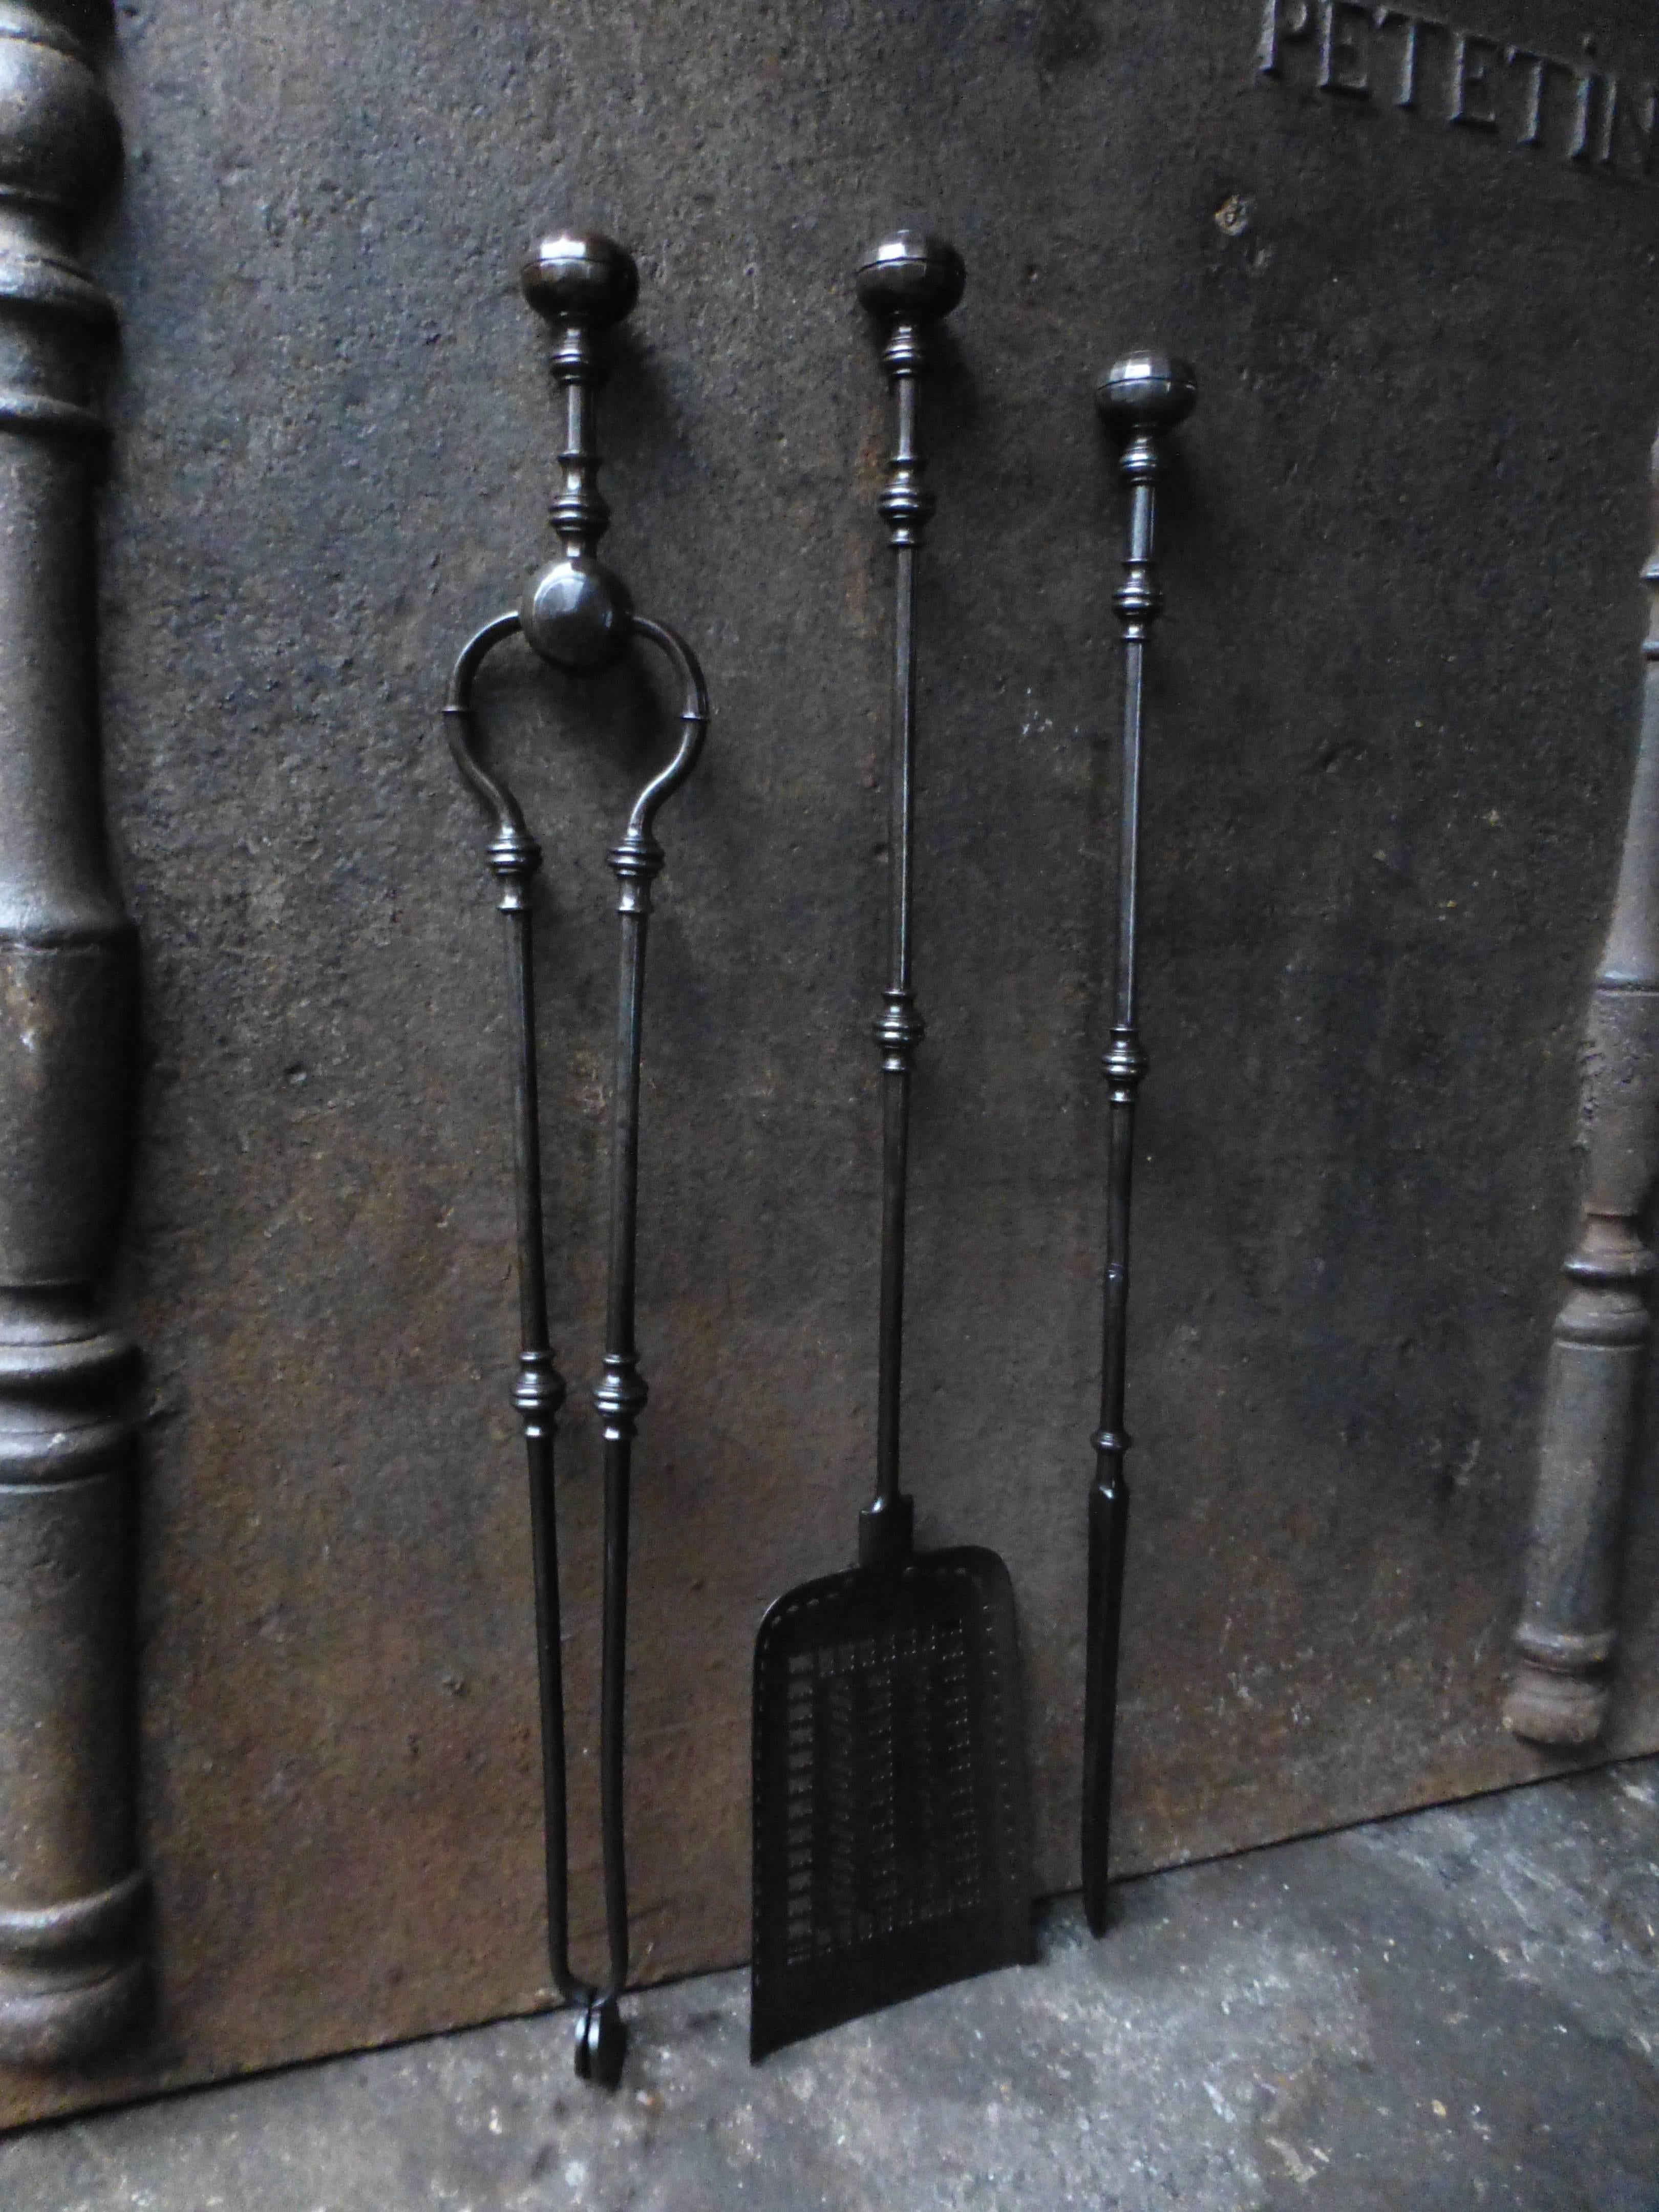 19th century English fireplace tools made of wrought iron.

We have a unique and specialized collection of antique and used fireplace accessories consisting of more than 1000 listings at 1stdibs. Amongst others, we always have 500+ firebacks, 400+